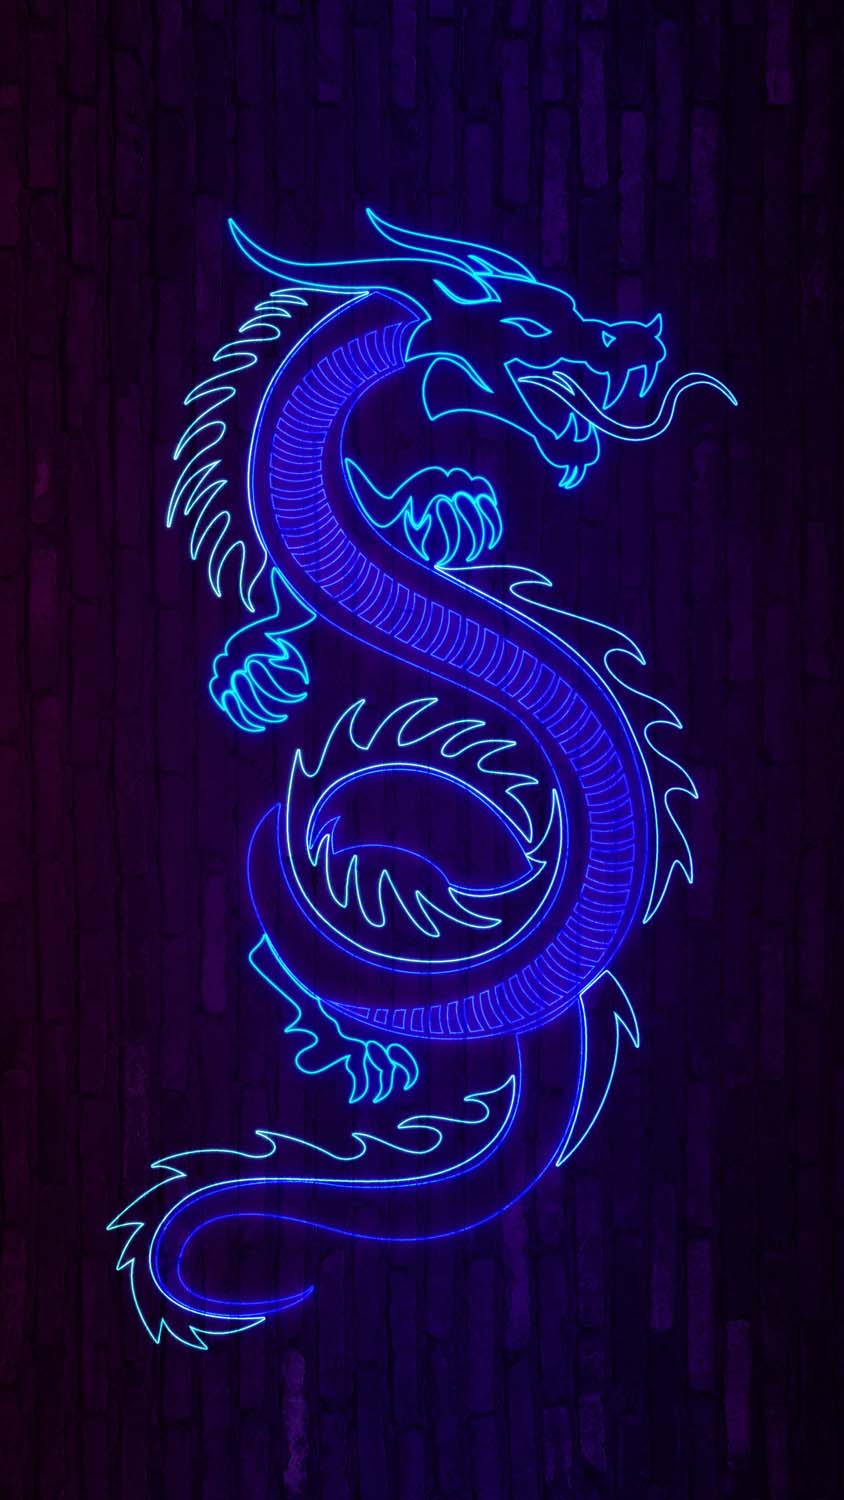 Blue Dragon IPhone Wallpaper HD - IPhone Wallpapers : iPhone Wallpapers